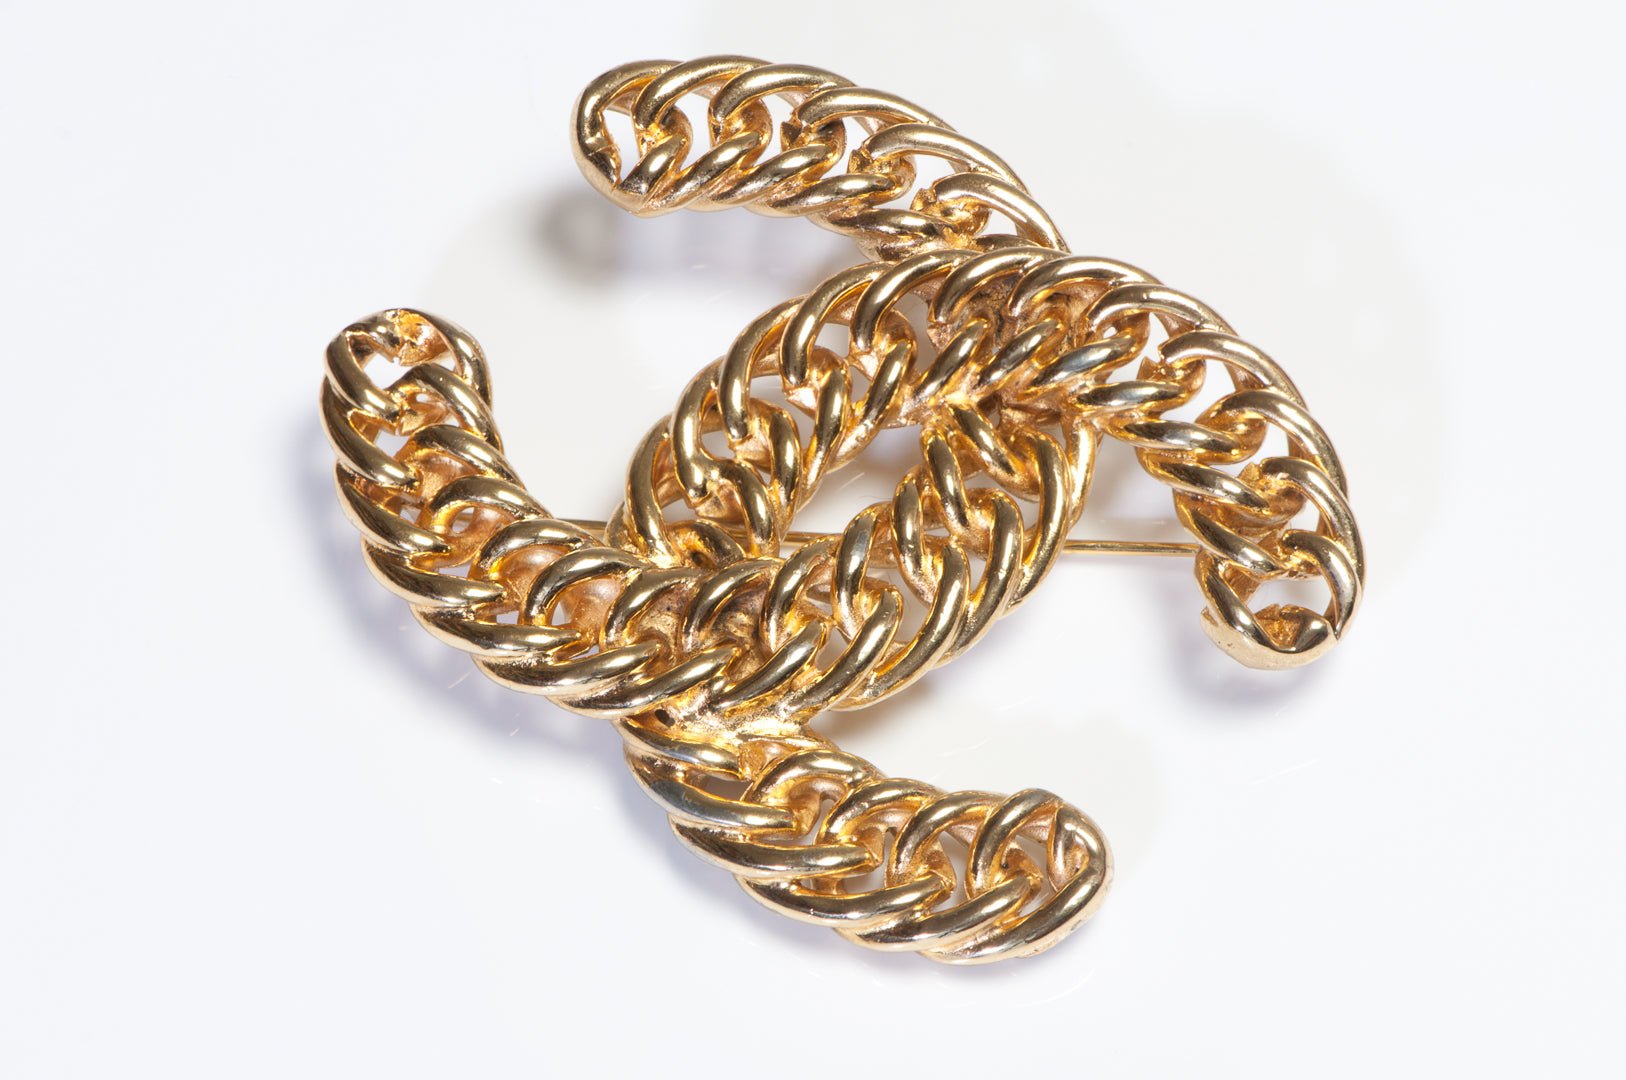 Vintage 1980's Chanel Paris Large Gold Plated CC Chain Brooch